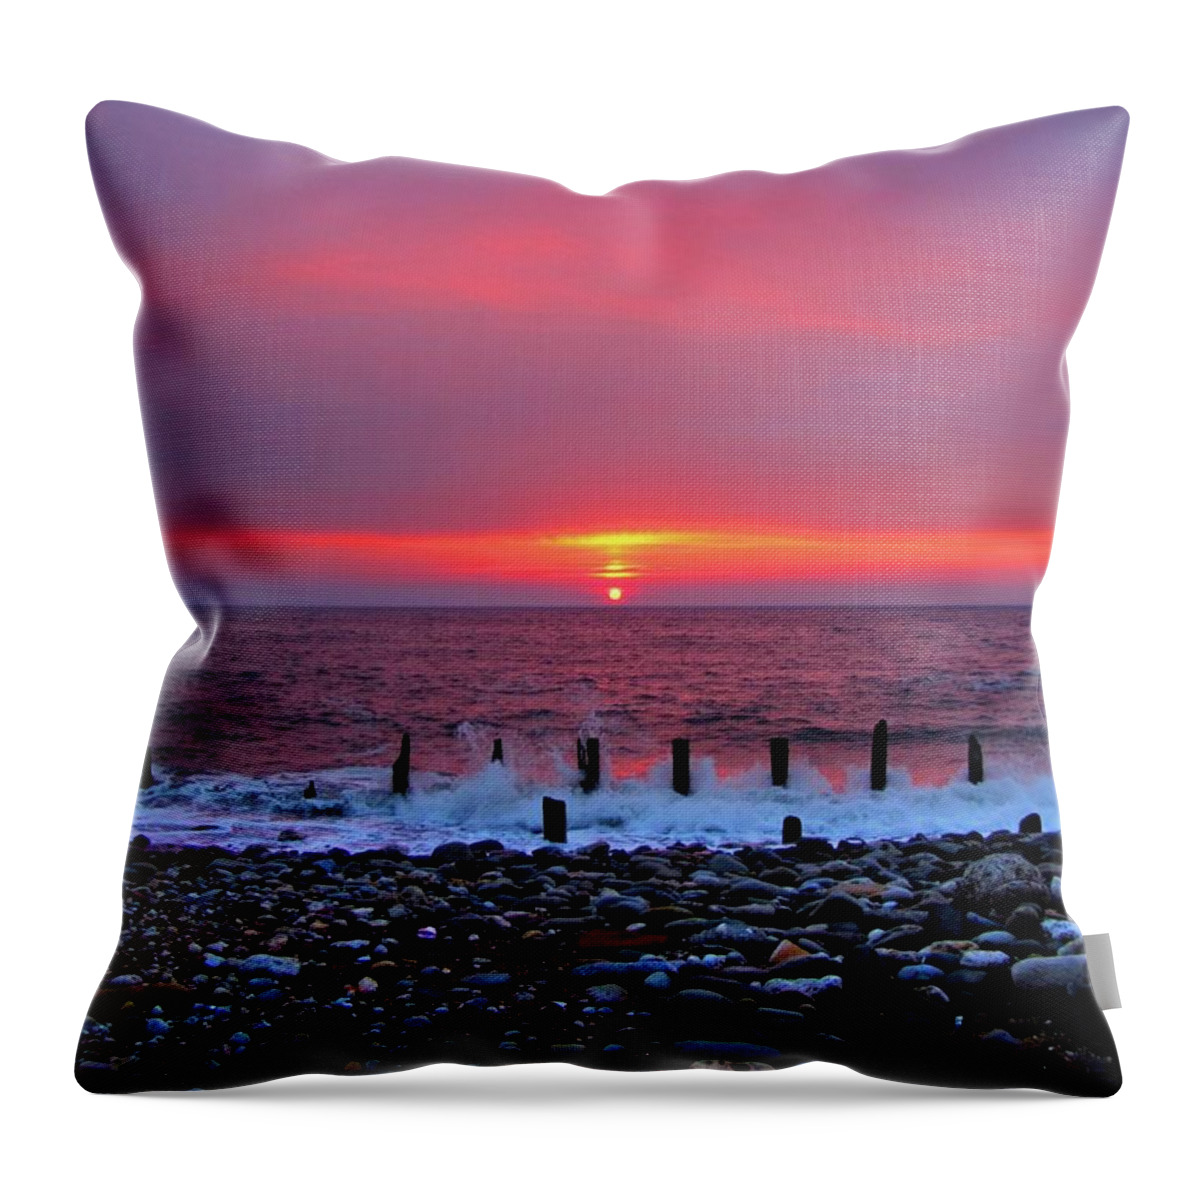 Scenics Throw Pillow featuring the photograph Open Furnace by Paul Downing